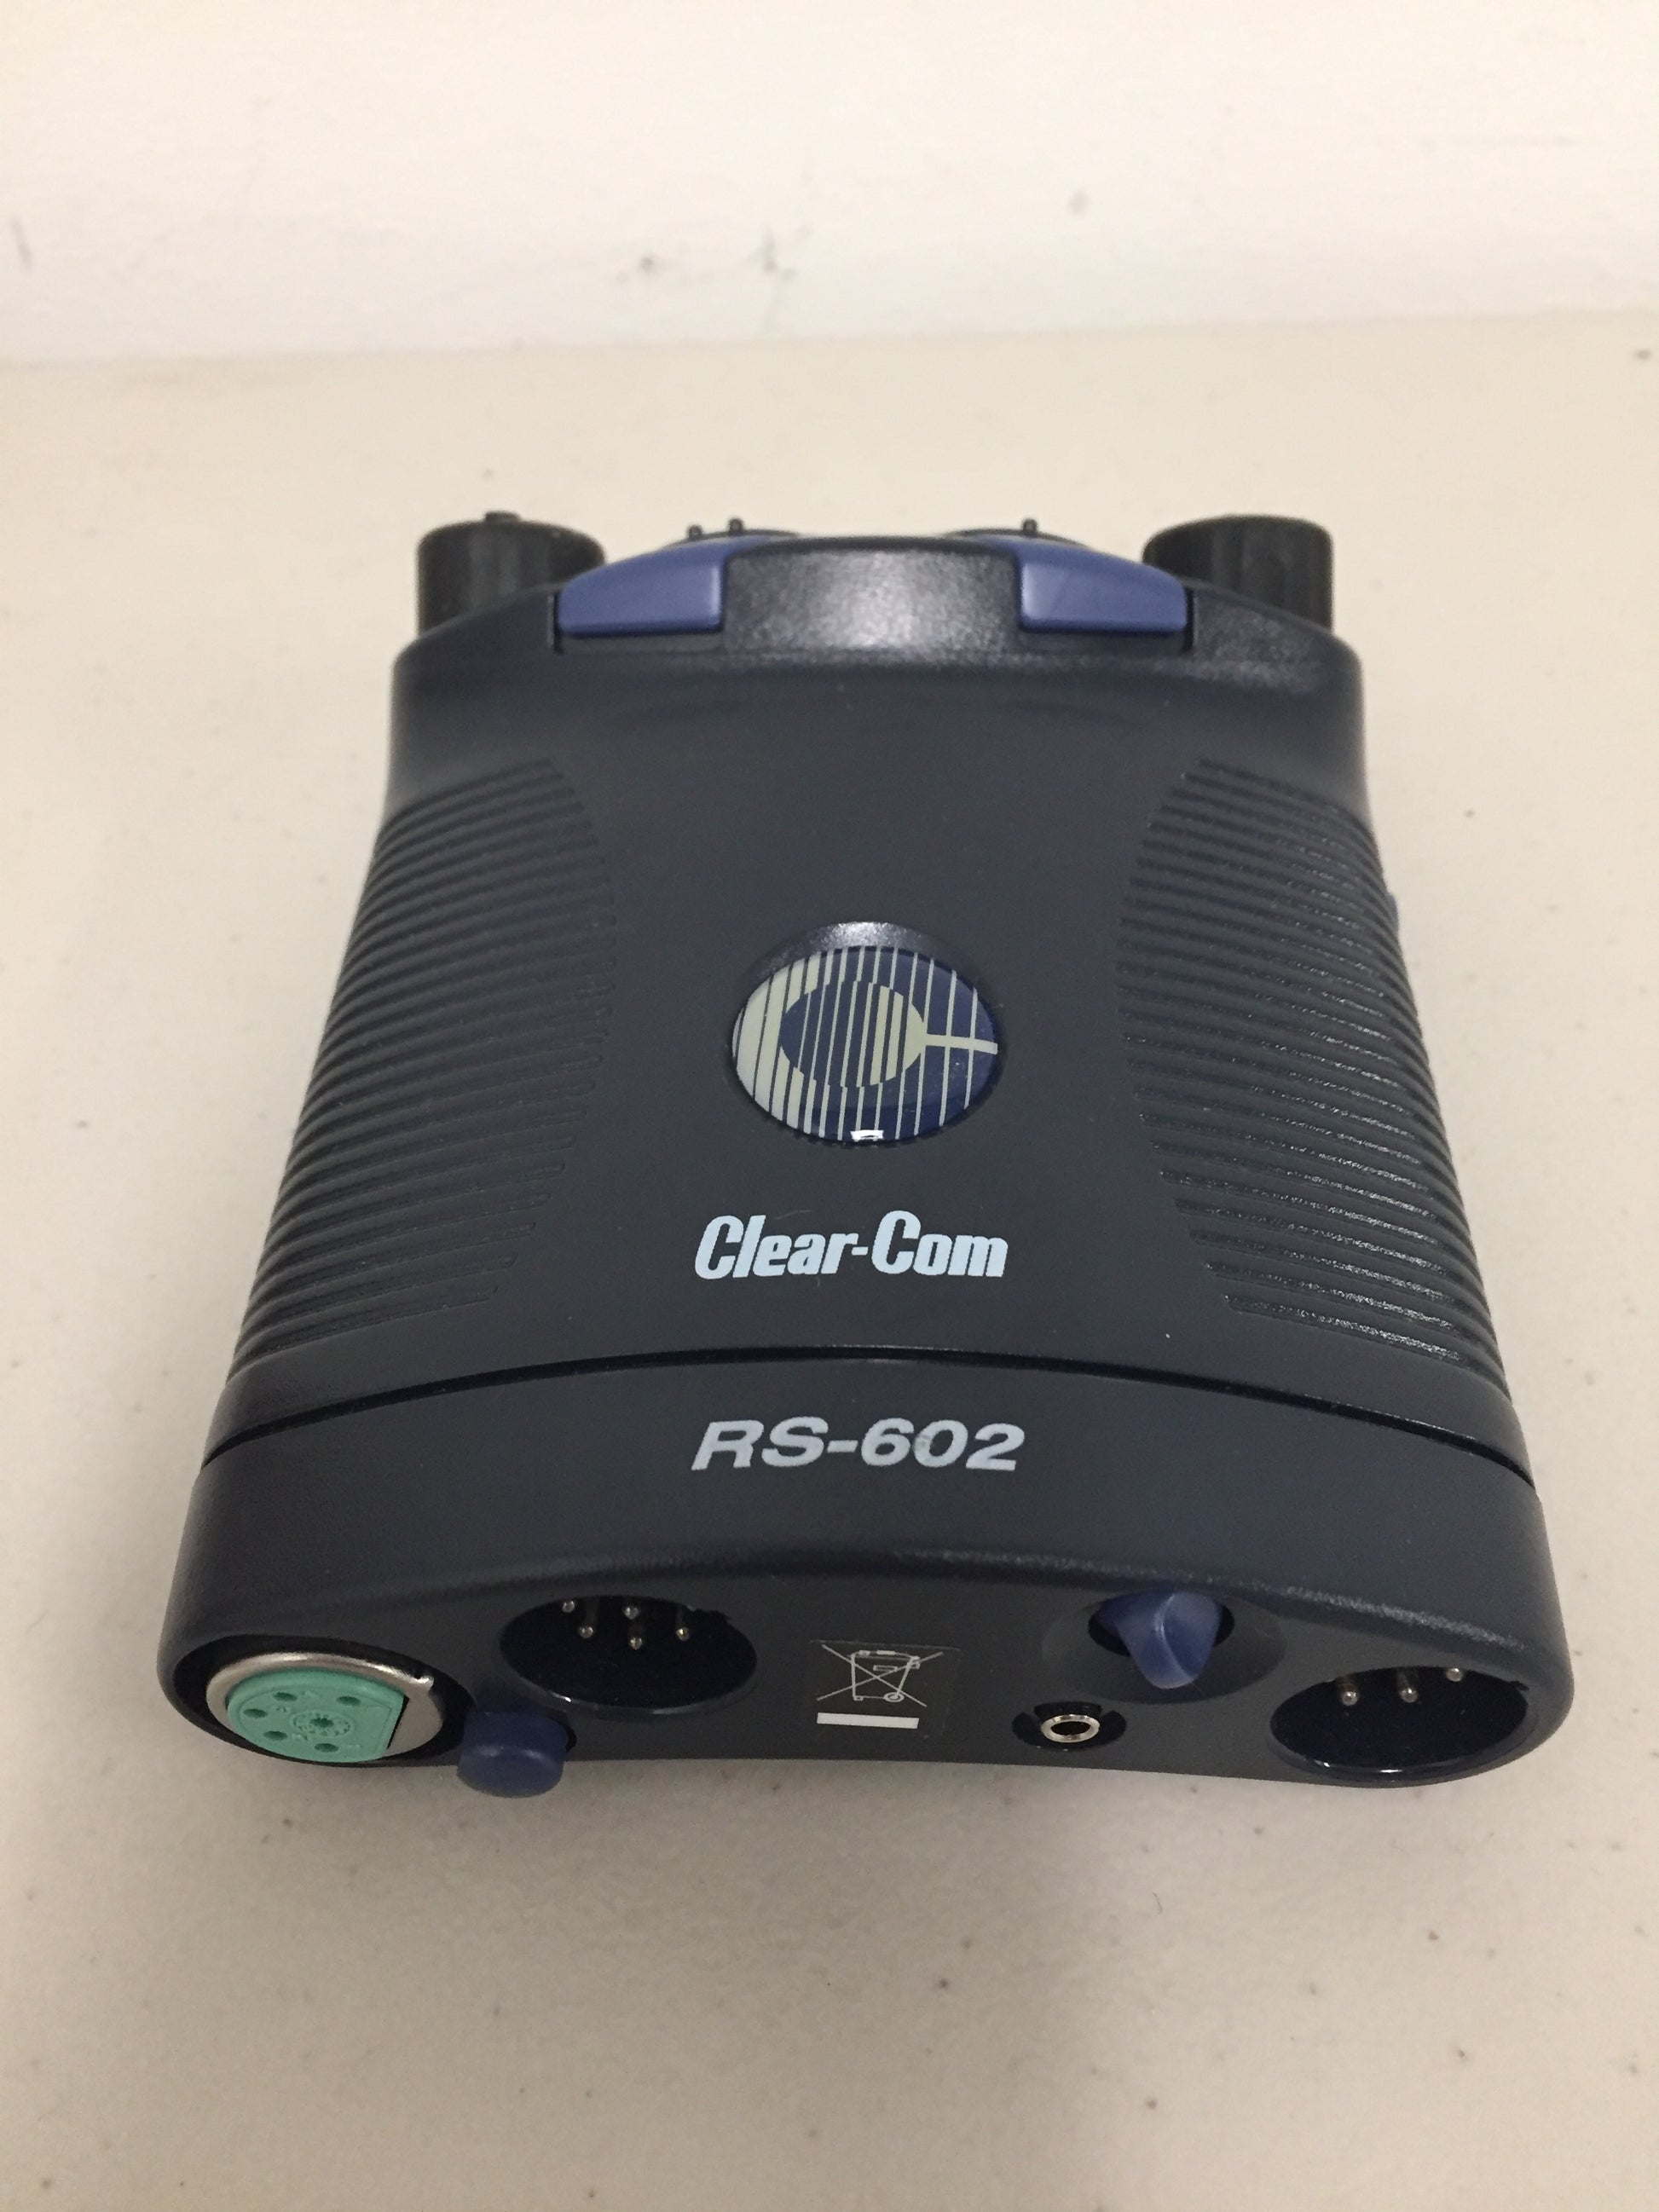 Used Clear-Com RS-602 Dual Channel Wired Intercom Beltpack, We Sell Professional Audio Equipment. Audio Systems, Amplifiers, Consoles, Mixers, Electronics, Entertainment, Sound, Live